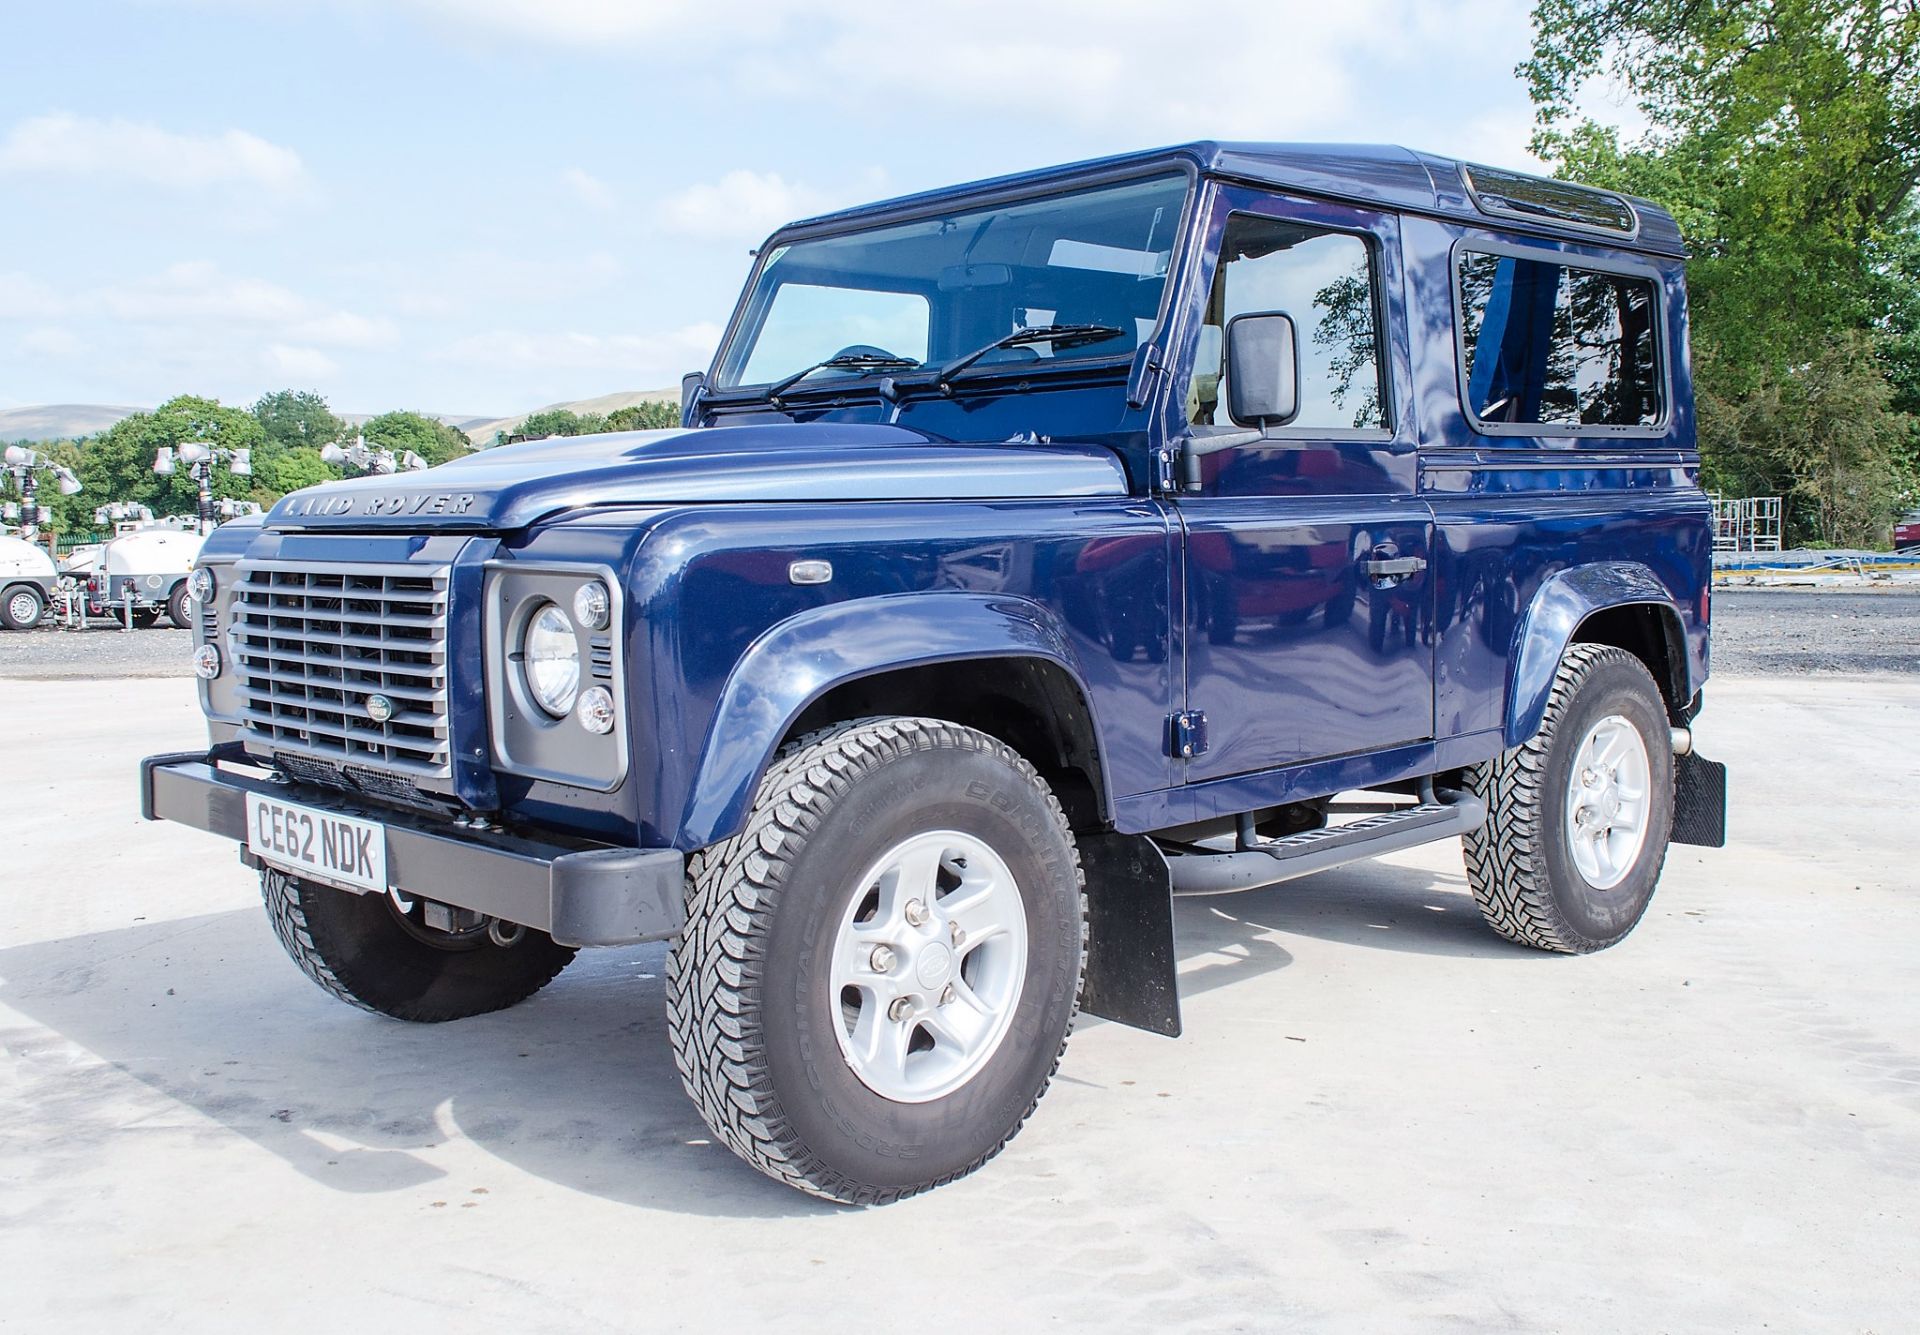 Landrover Defender 90 XS TD 2198cc 4x4 utility vehicle Registration Number: CE62 NDK Date of